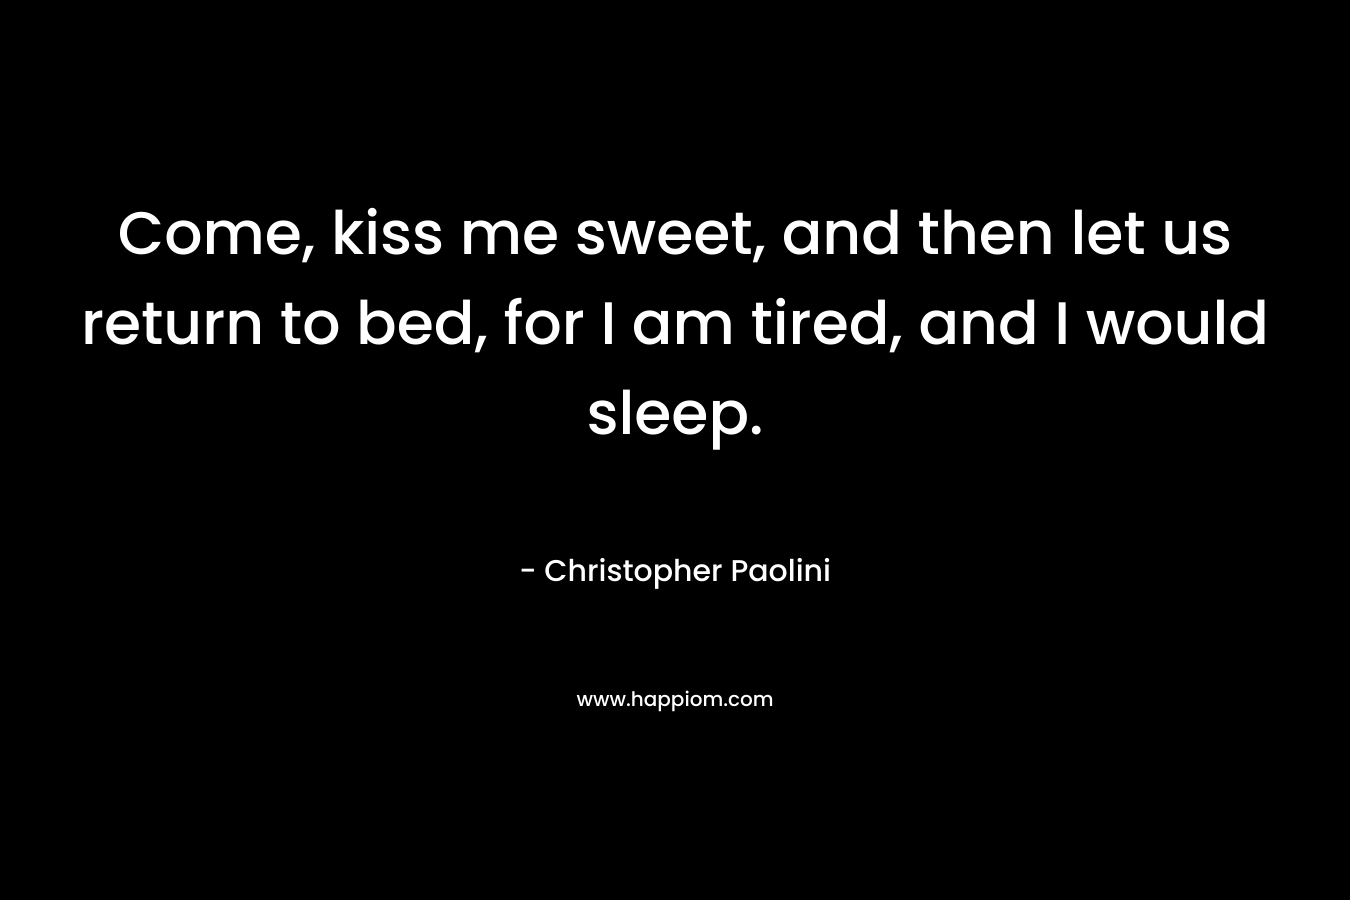 Come, kiss me sweet, and then let us return to bed, for I am tired, and I would sleep.